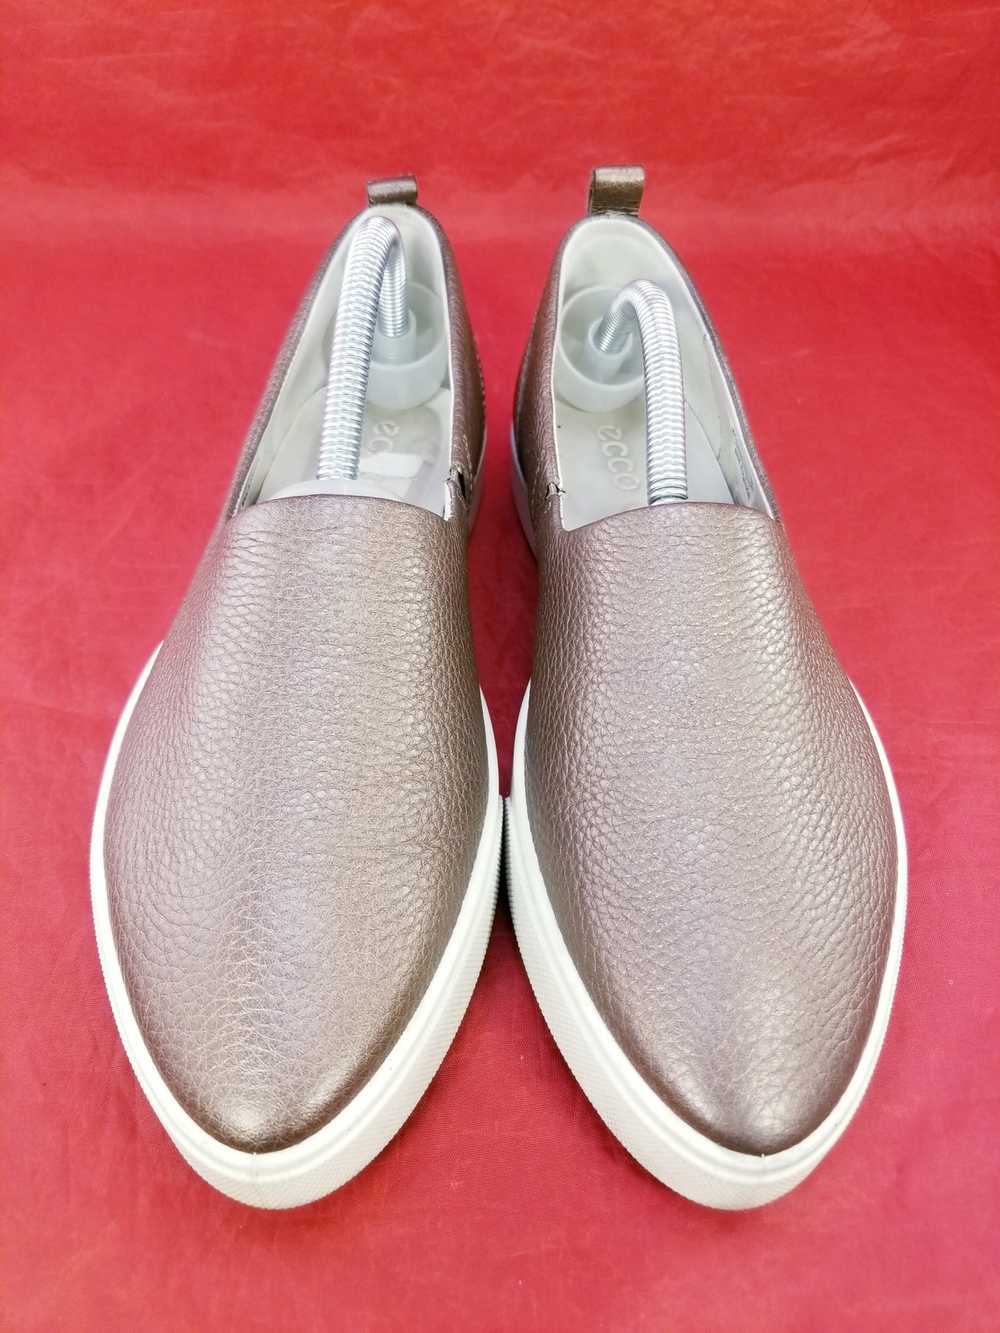 Ecco LOAFERS SLIP ON - image 4